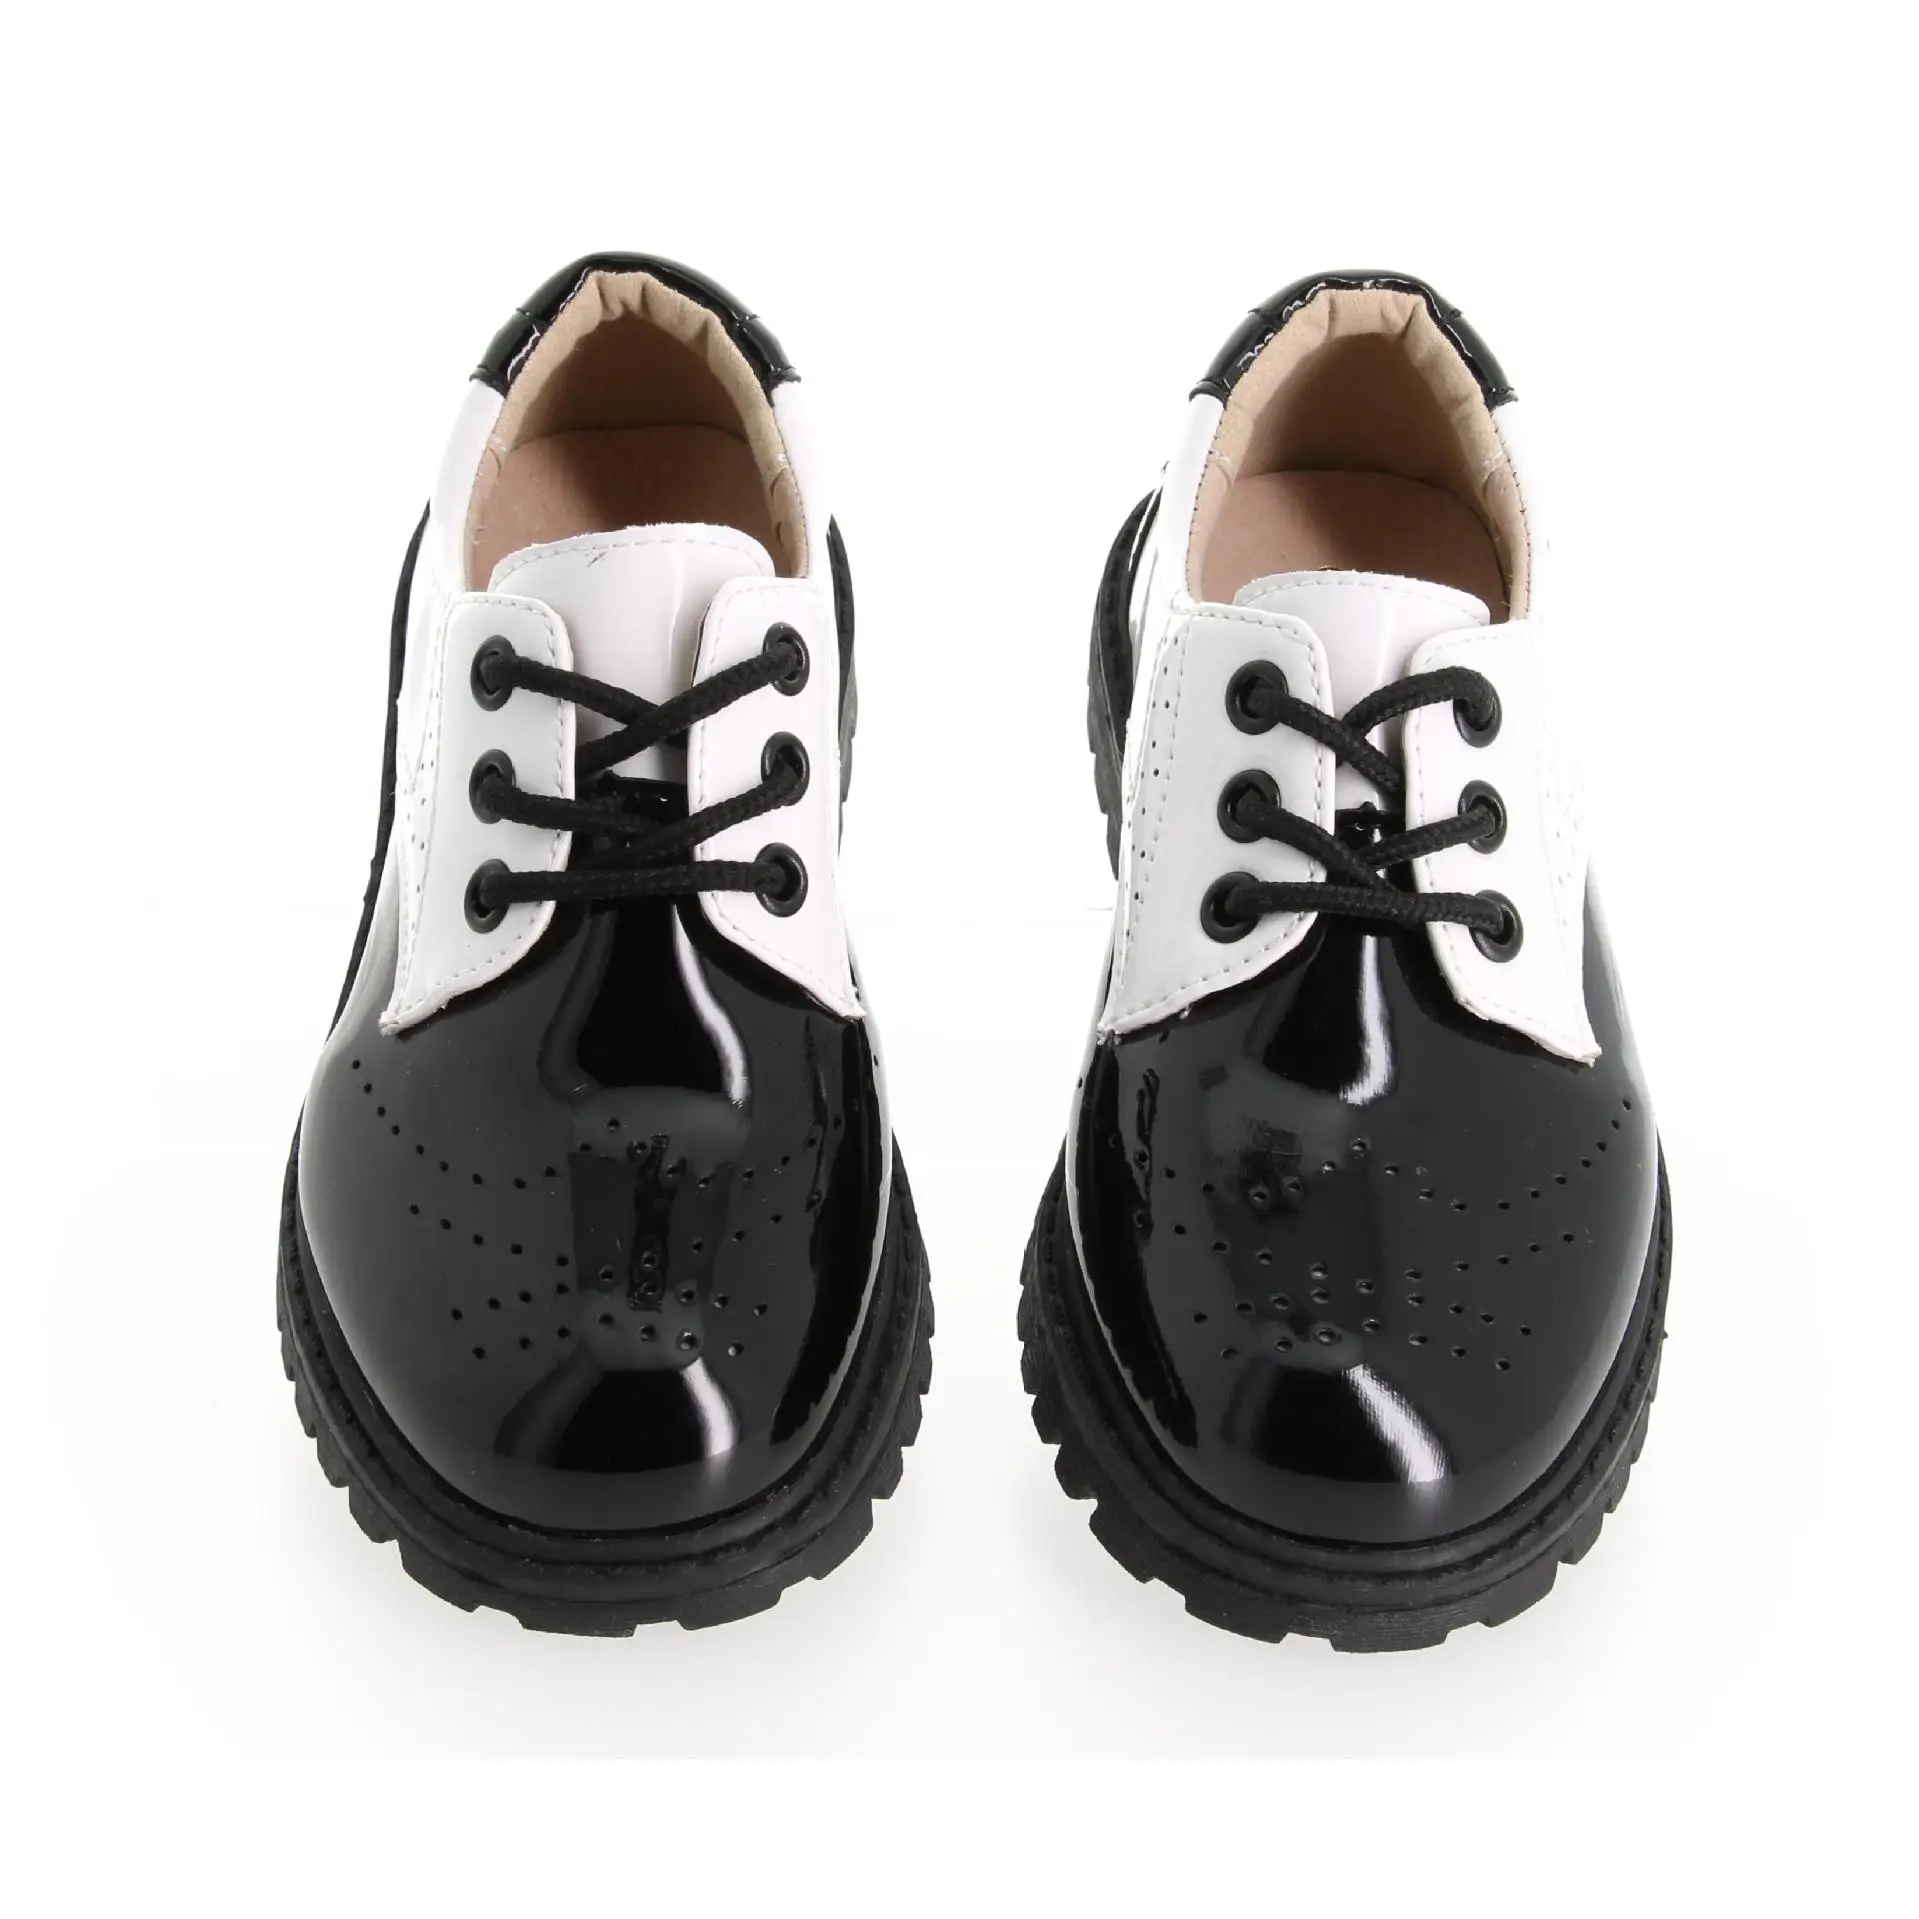 SIZES 10 TODDLER - 3 YOUTH NEW BOYS DRESS SHOES BLACK WEDDING PARTY 